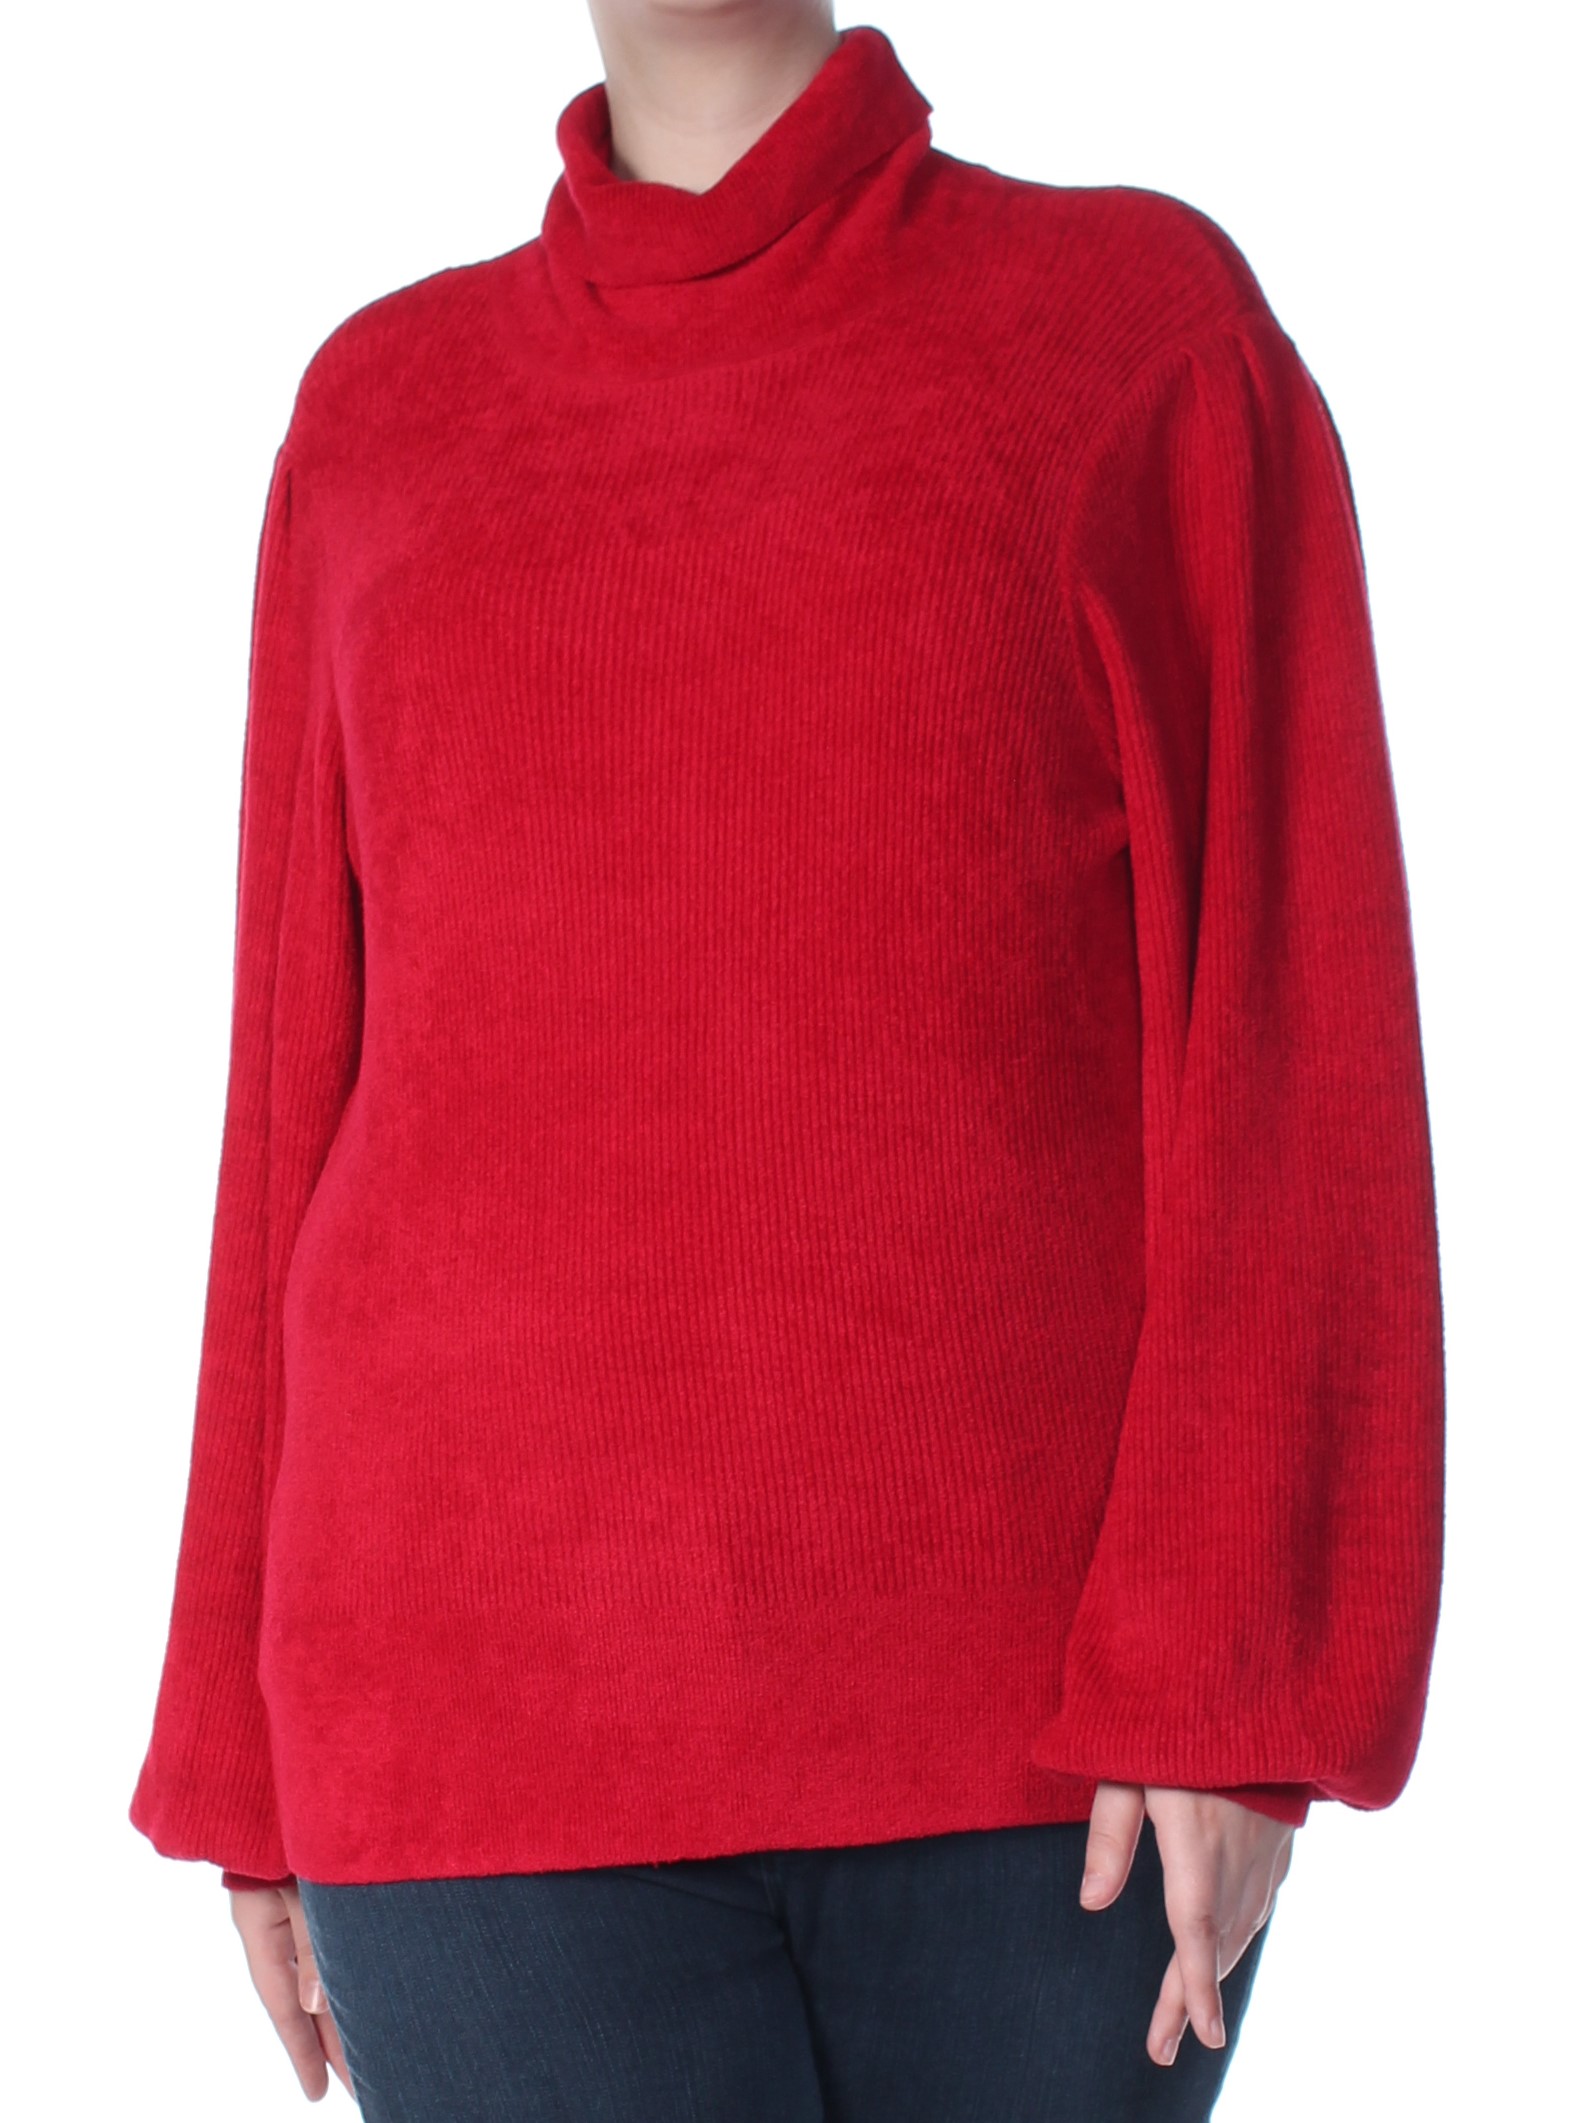 DKNY Womens Red Chenille Long Sleeve Turtle Neck Top XL